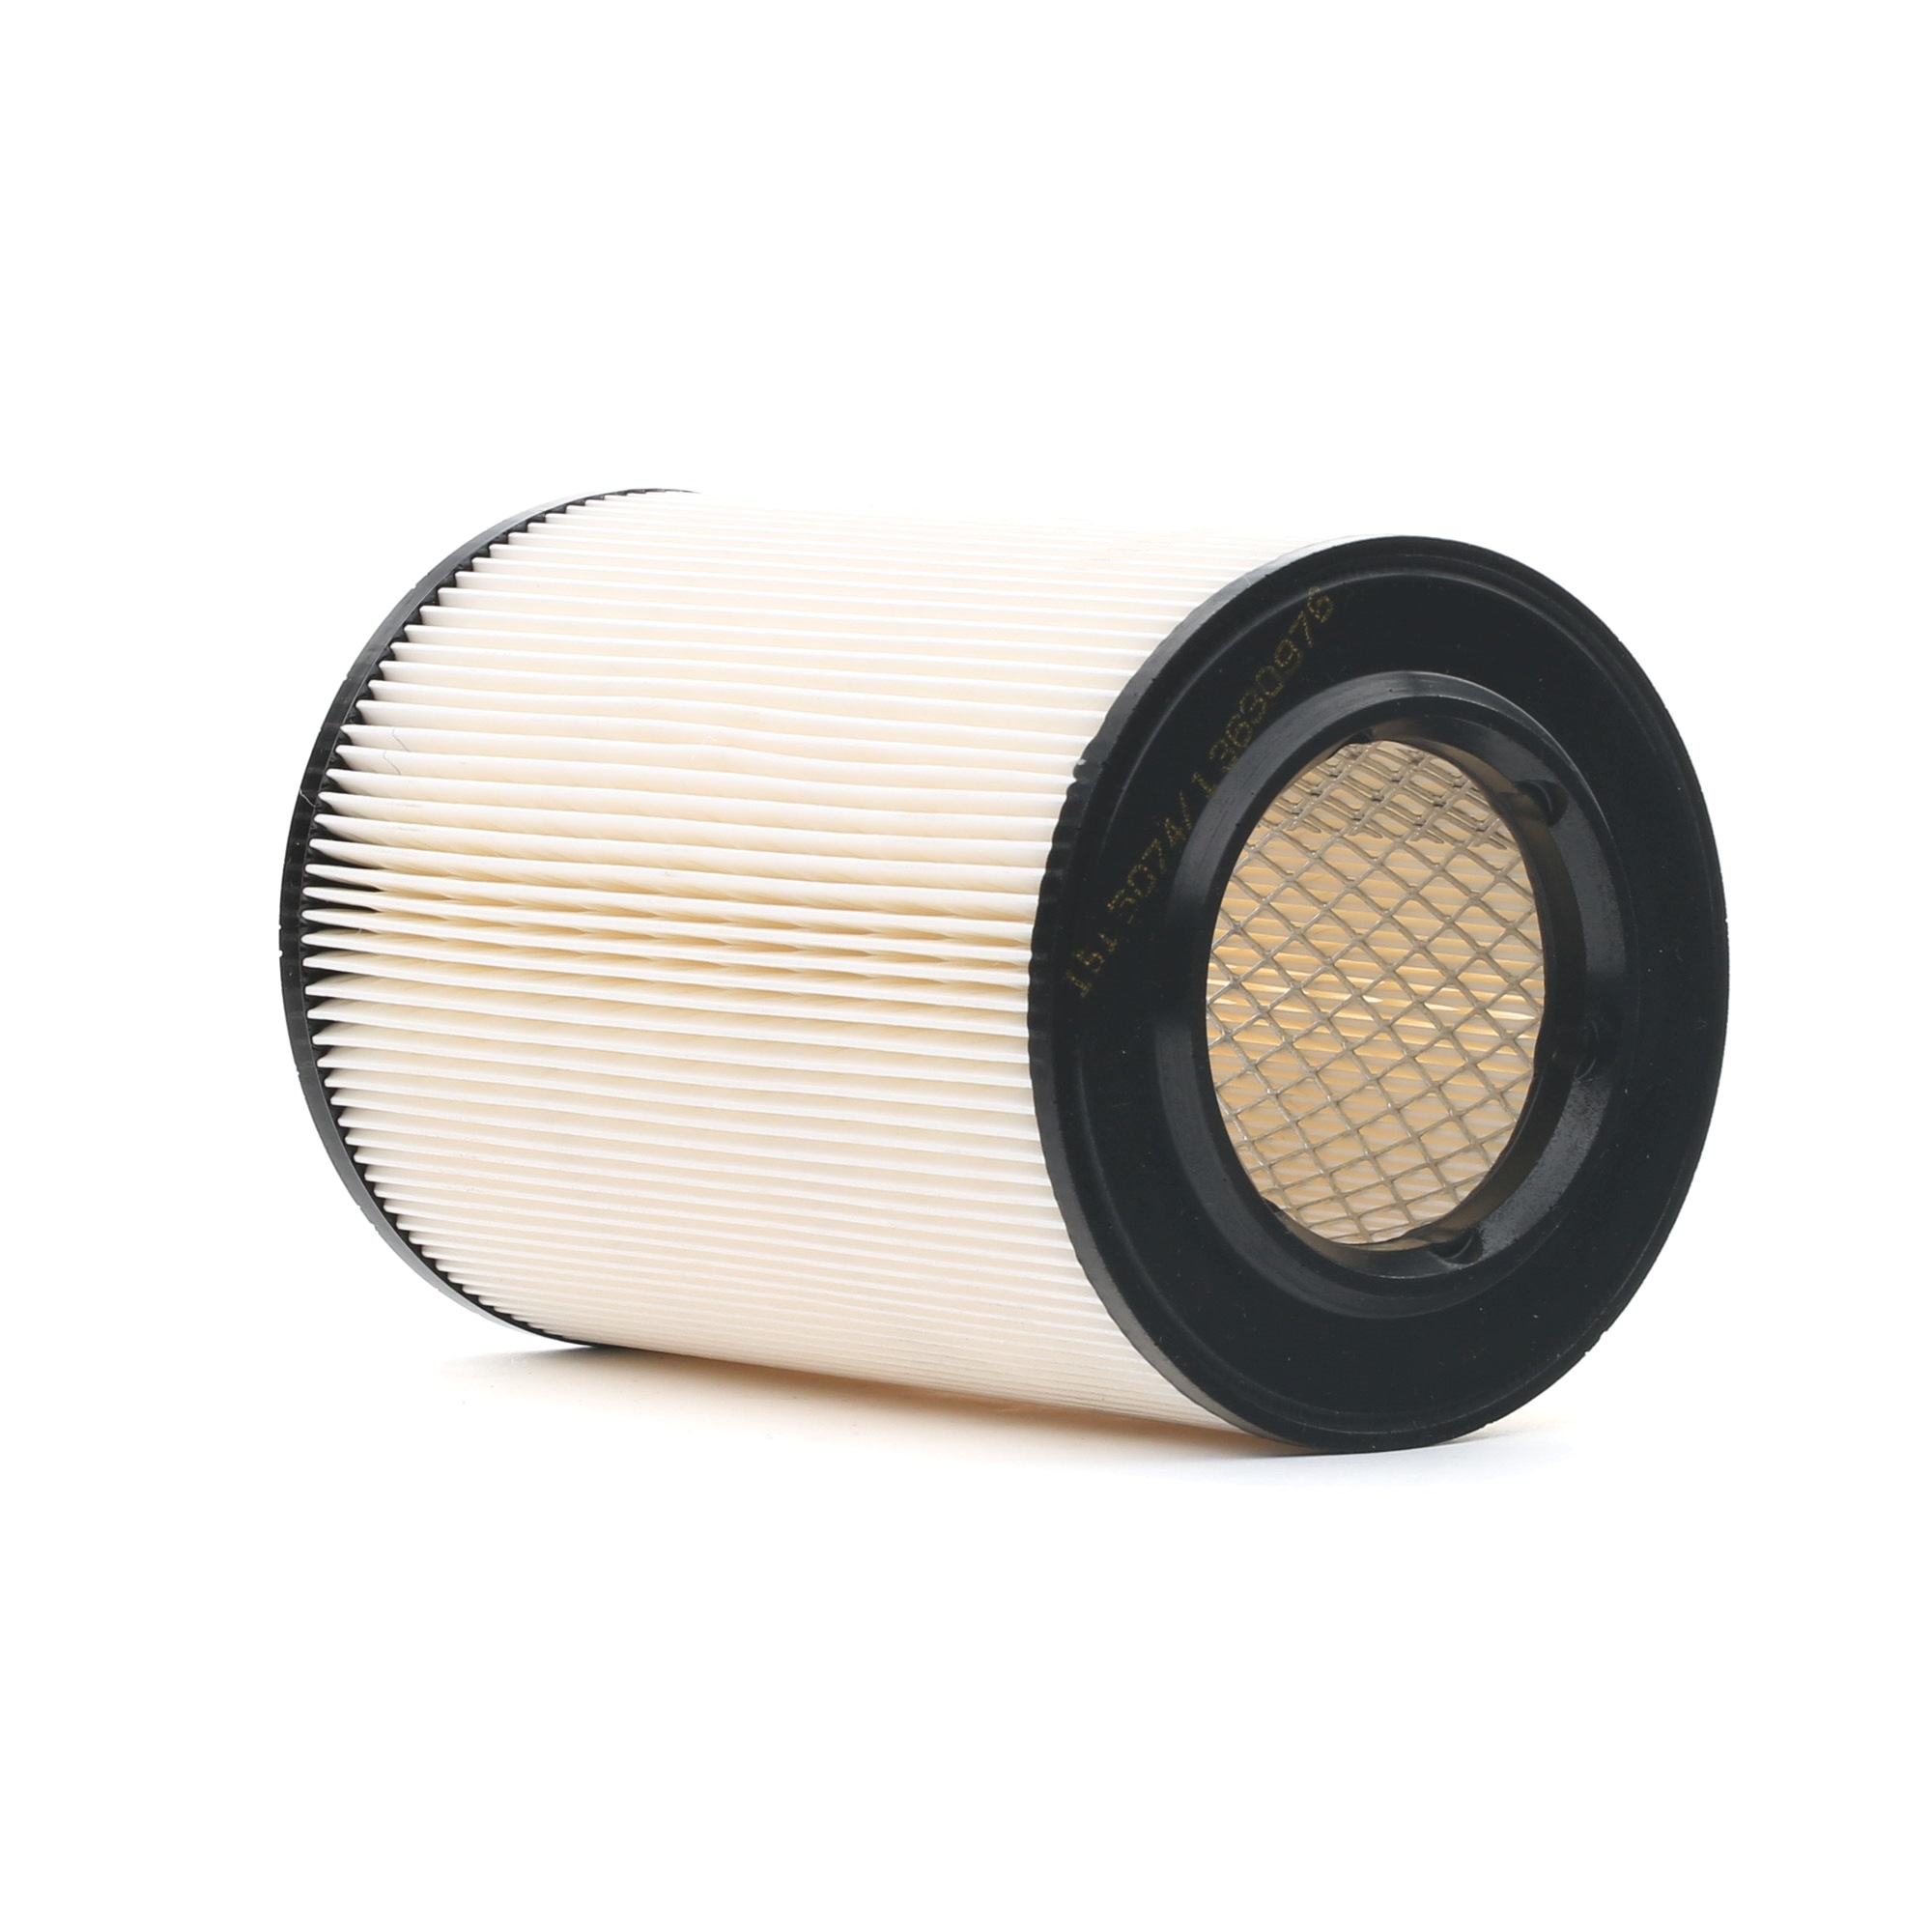 RIDEX 8A0551 Air filter 173mm, 125mm, Air Recirculation Filter, Filter Insert, Centrifuge, with cover mesh